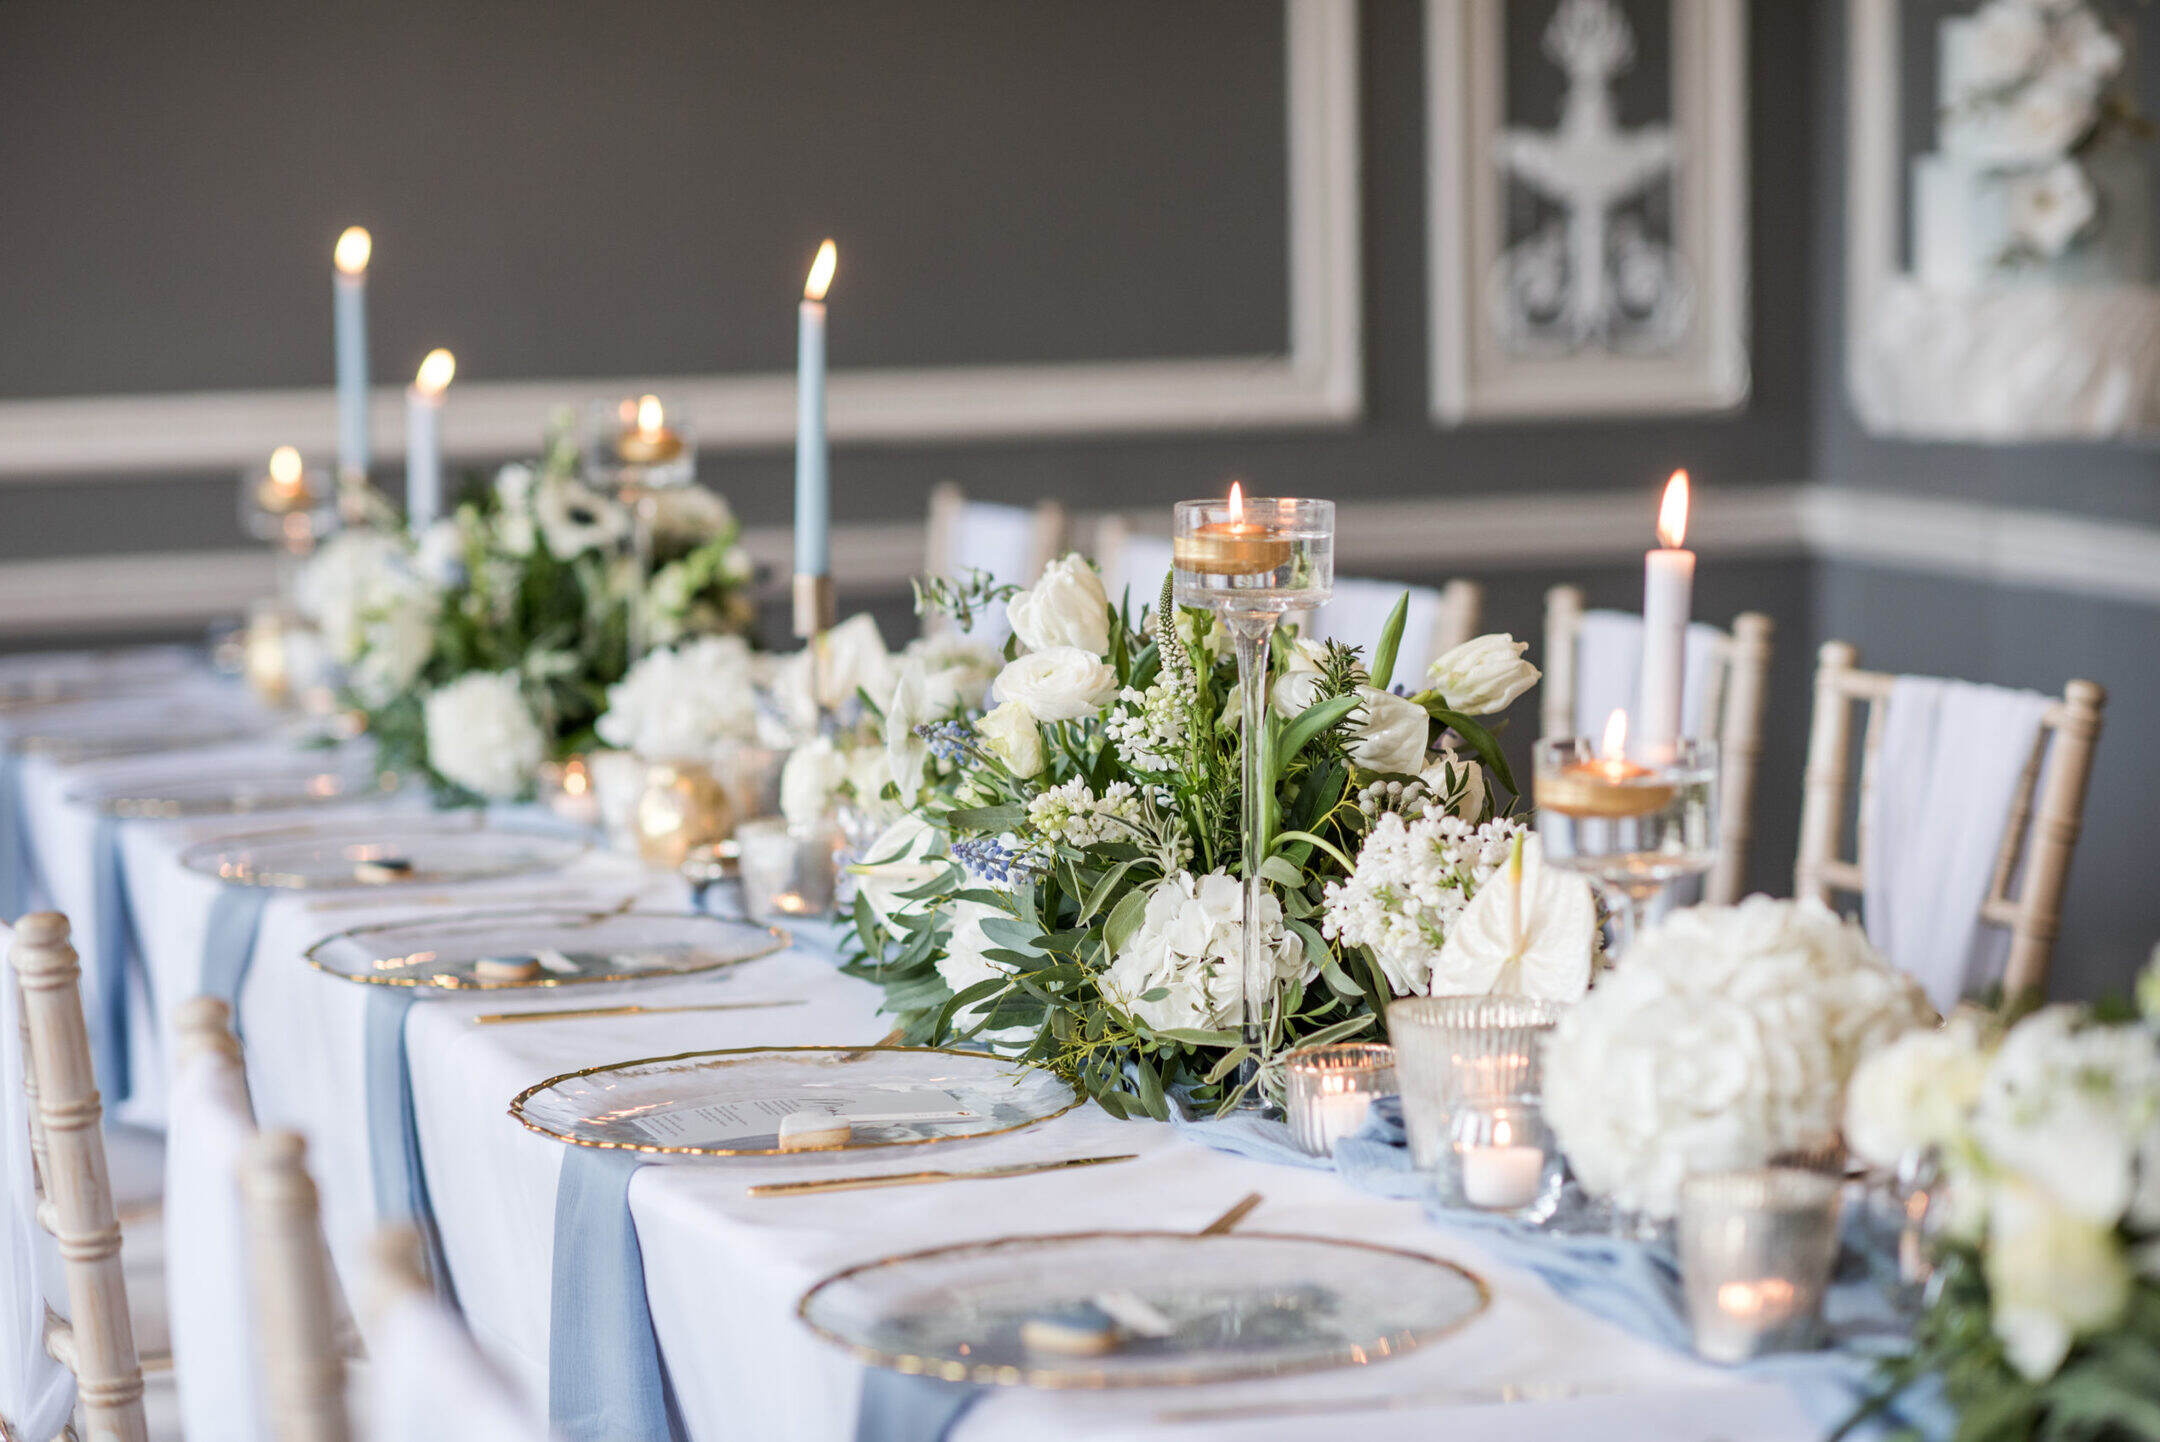 How Many Can Be Seated At A Banquet-Style Table?